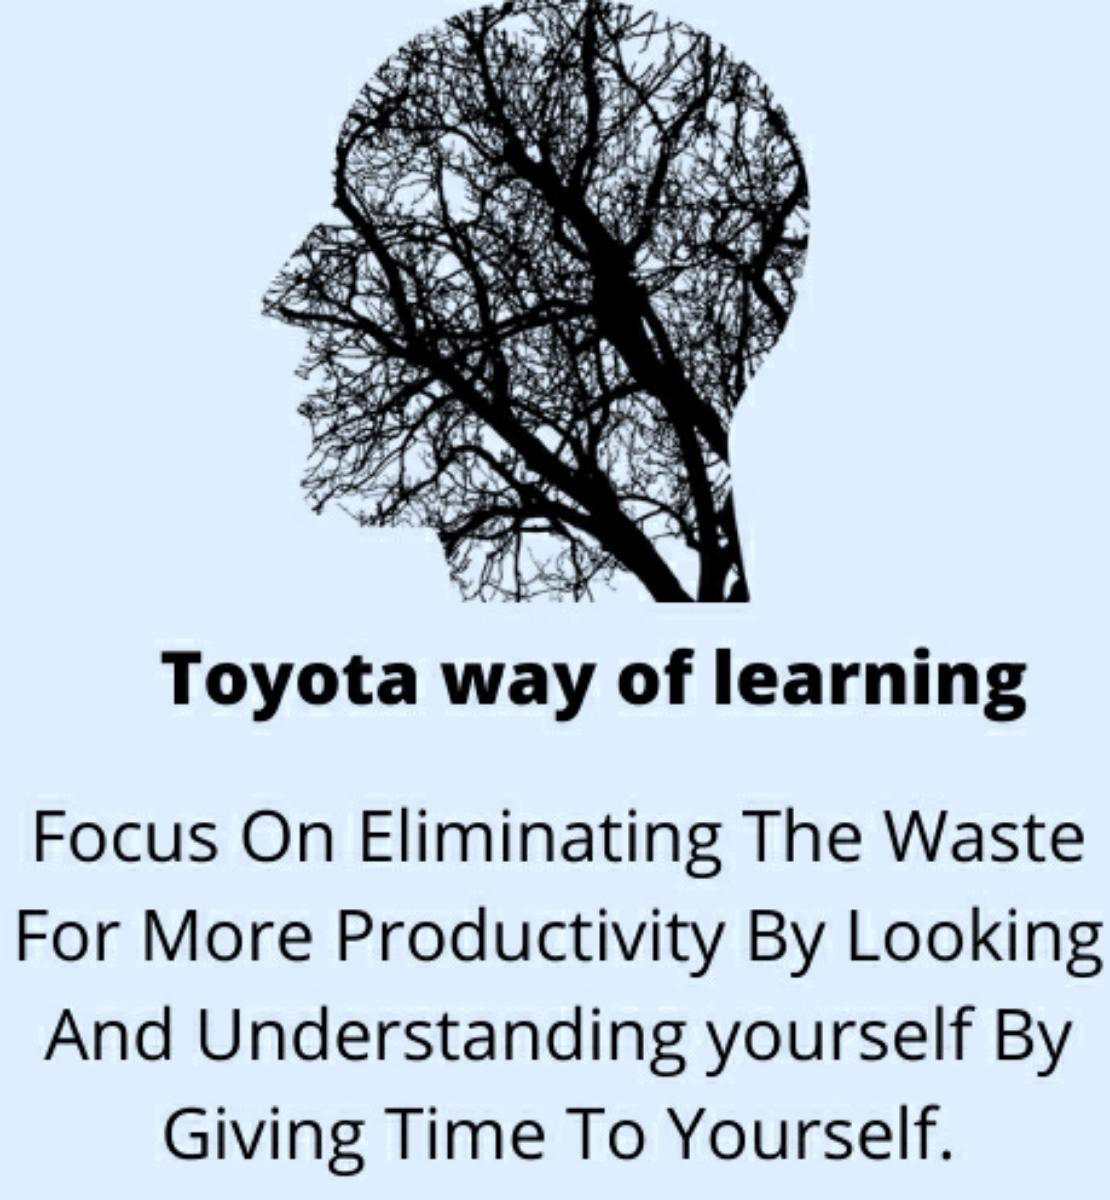 Toyota production system to increase your productivity